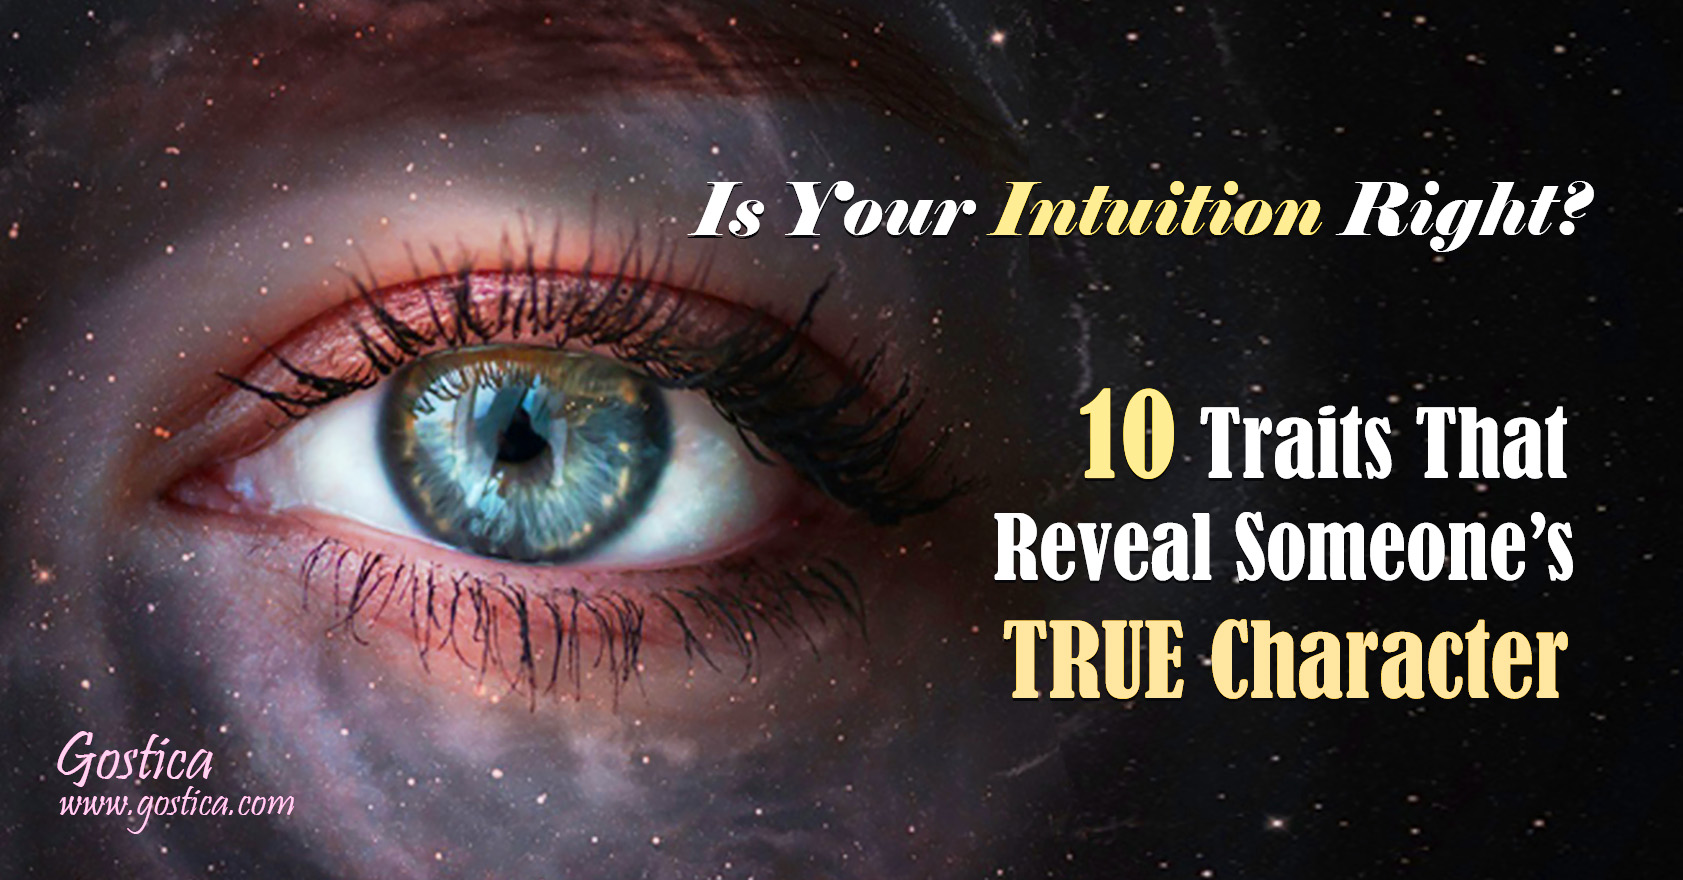 Is-Your-Intuition-Right-10-Traits-That-Reveal-Someone’s-TRUE-Character-1.jpg